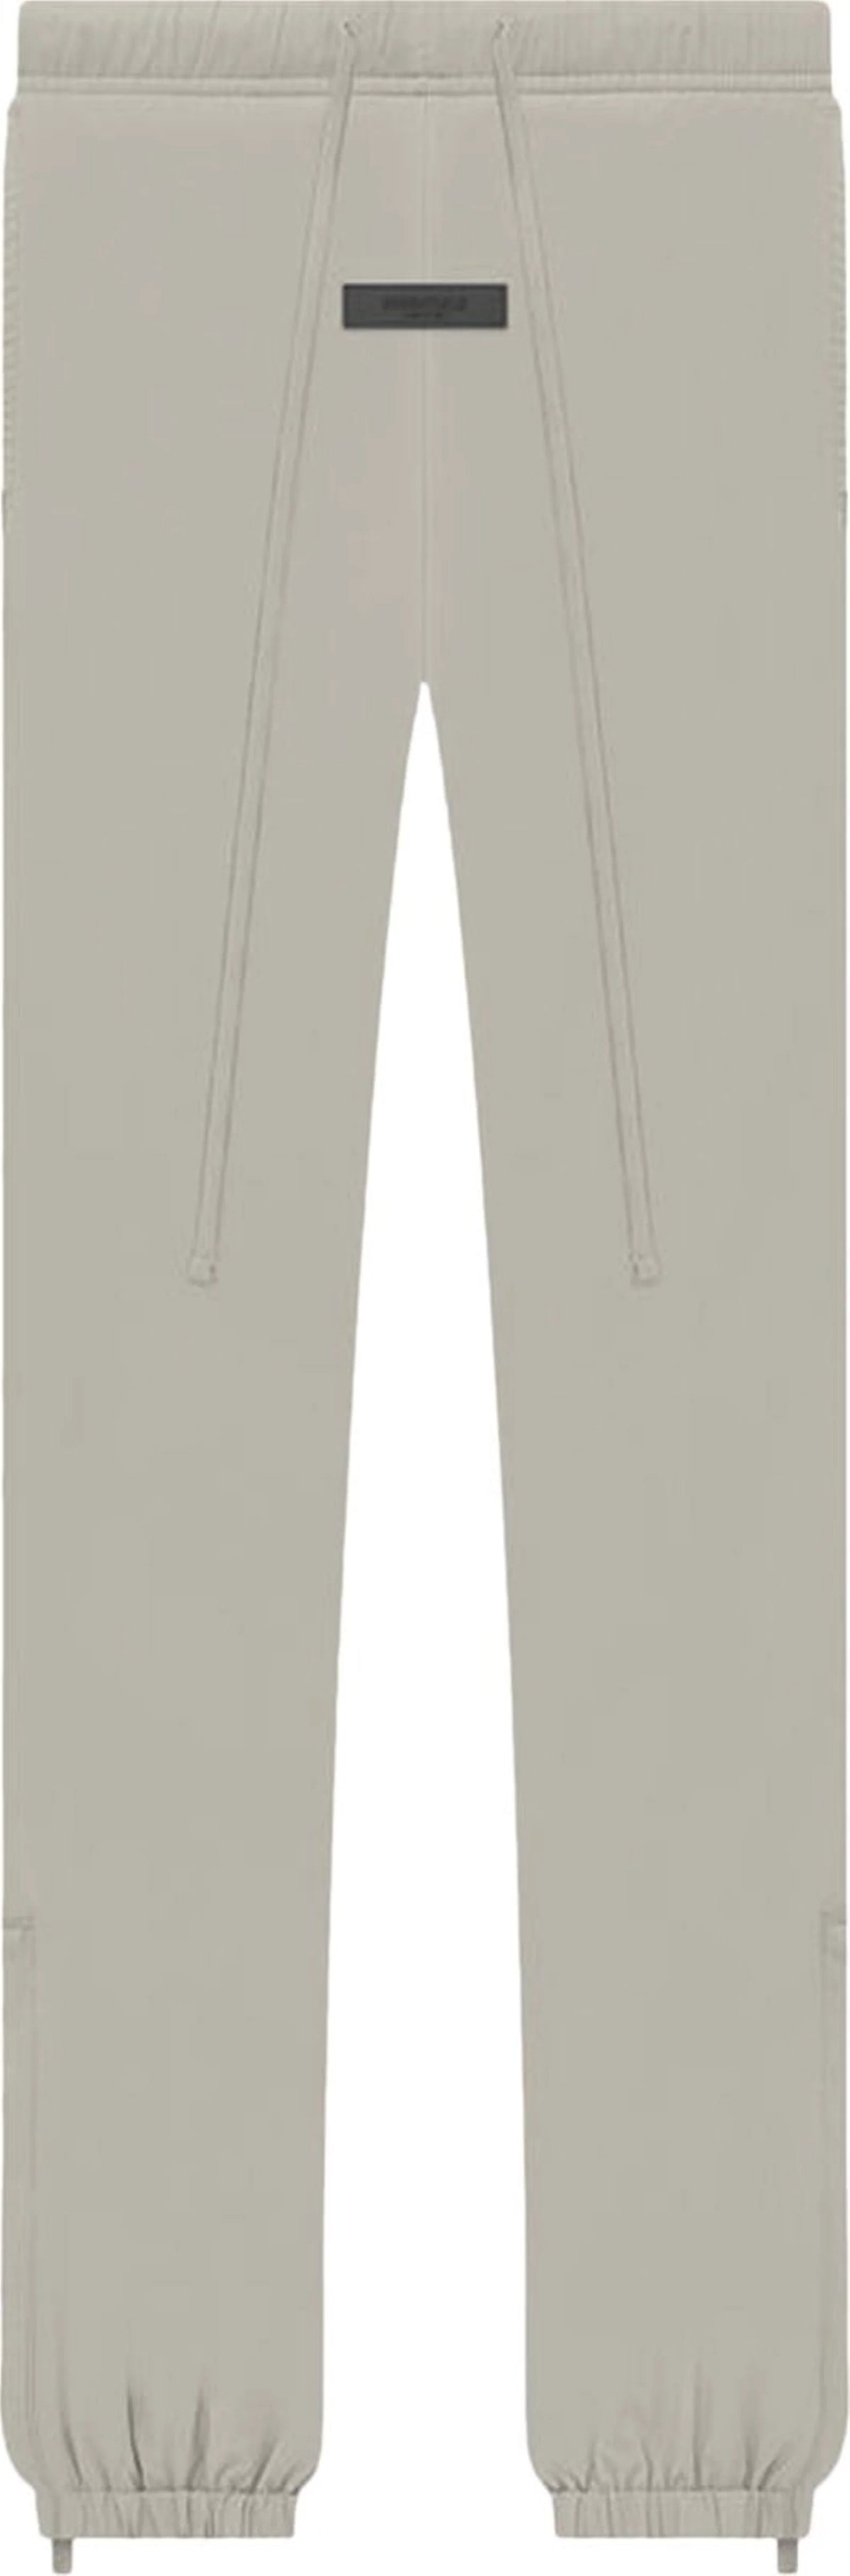 Fear of God Essentials Reflective logo Sweatpants 'Seal' (Preowned)